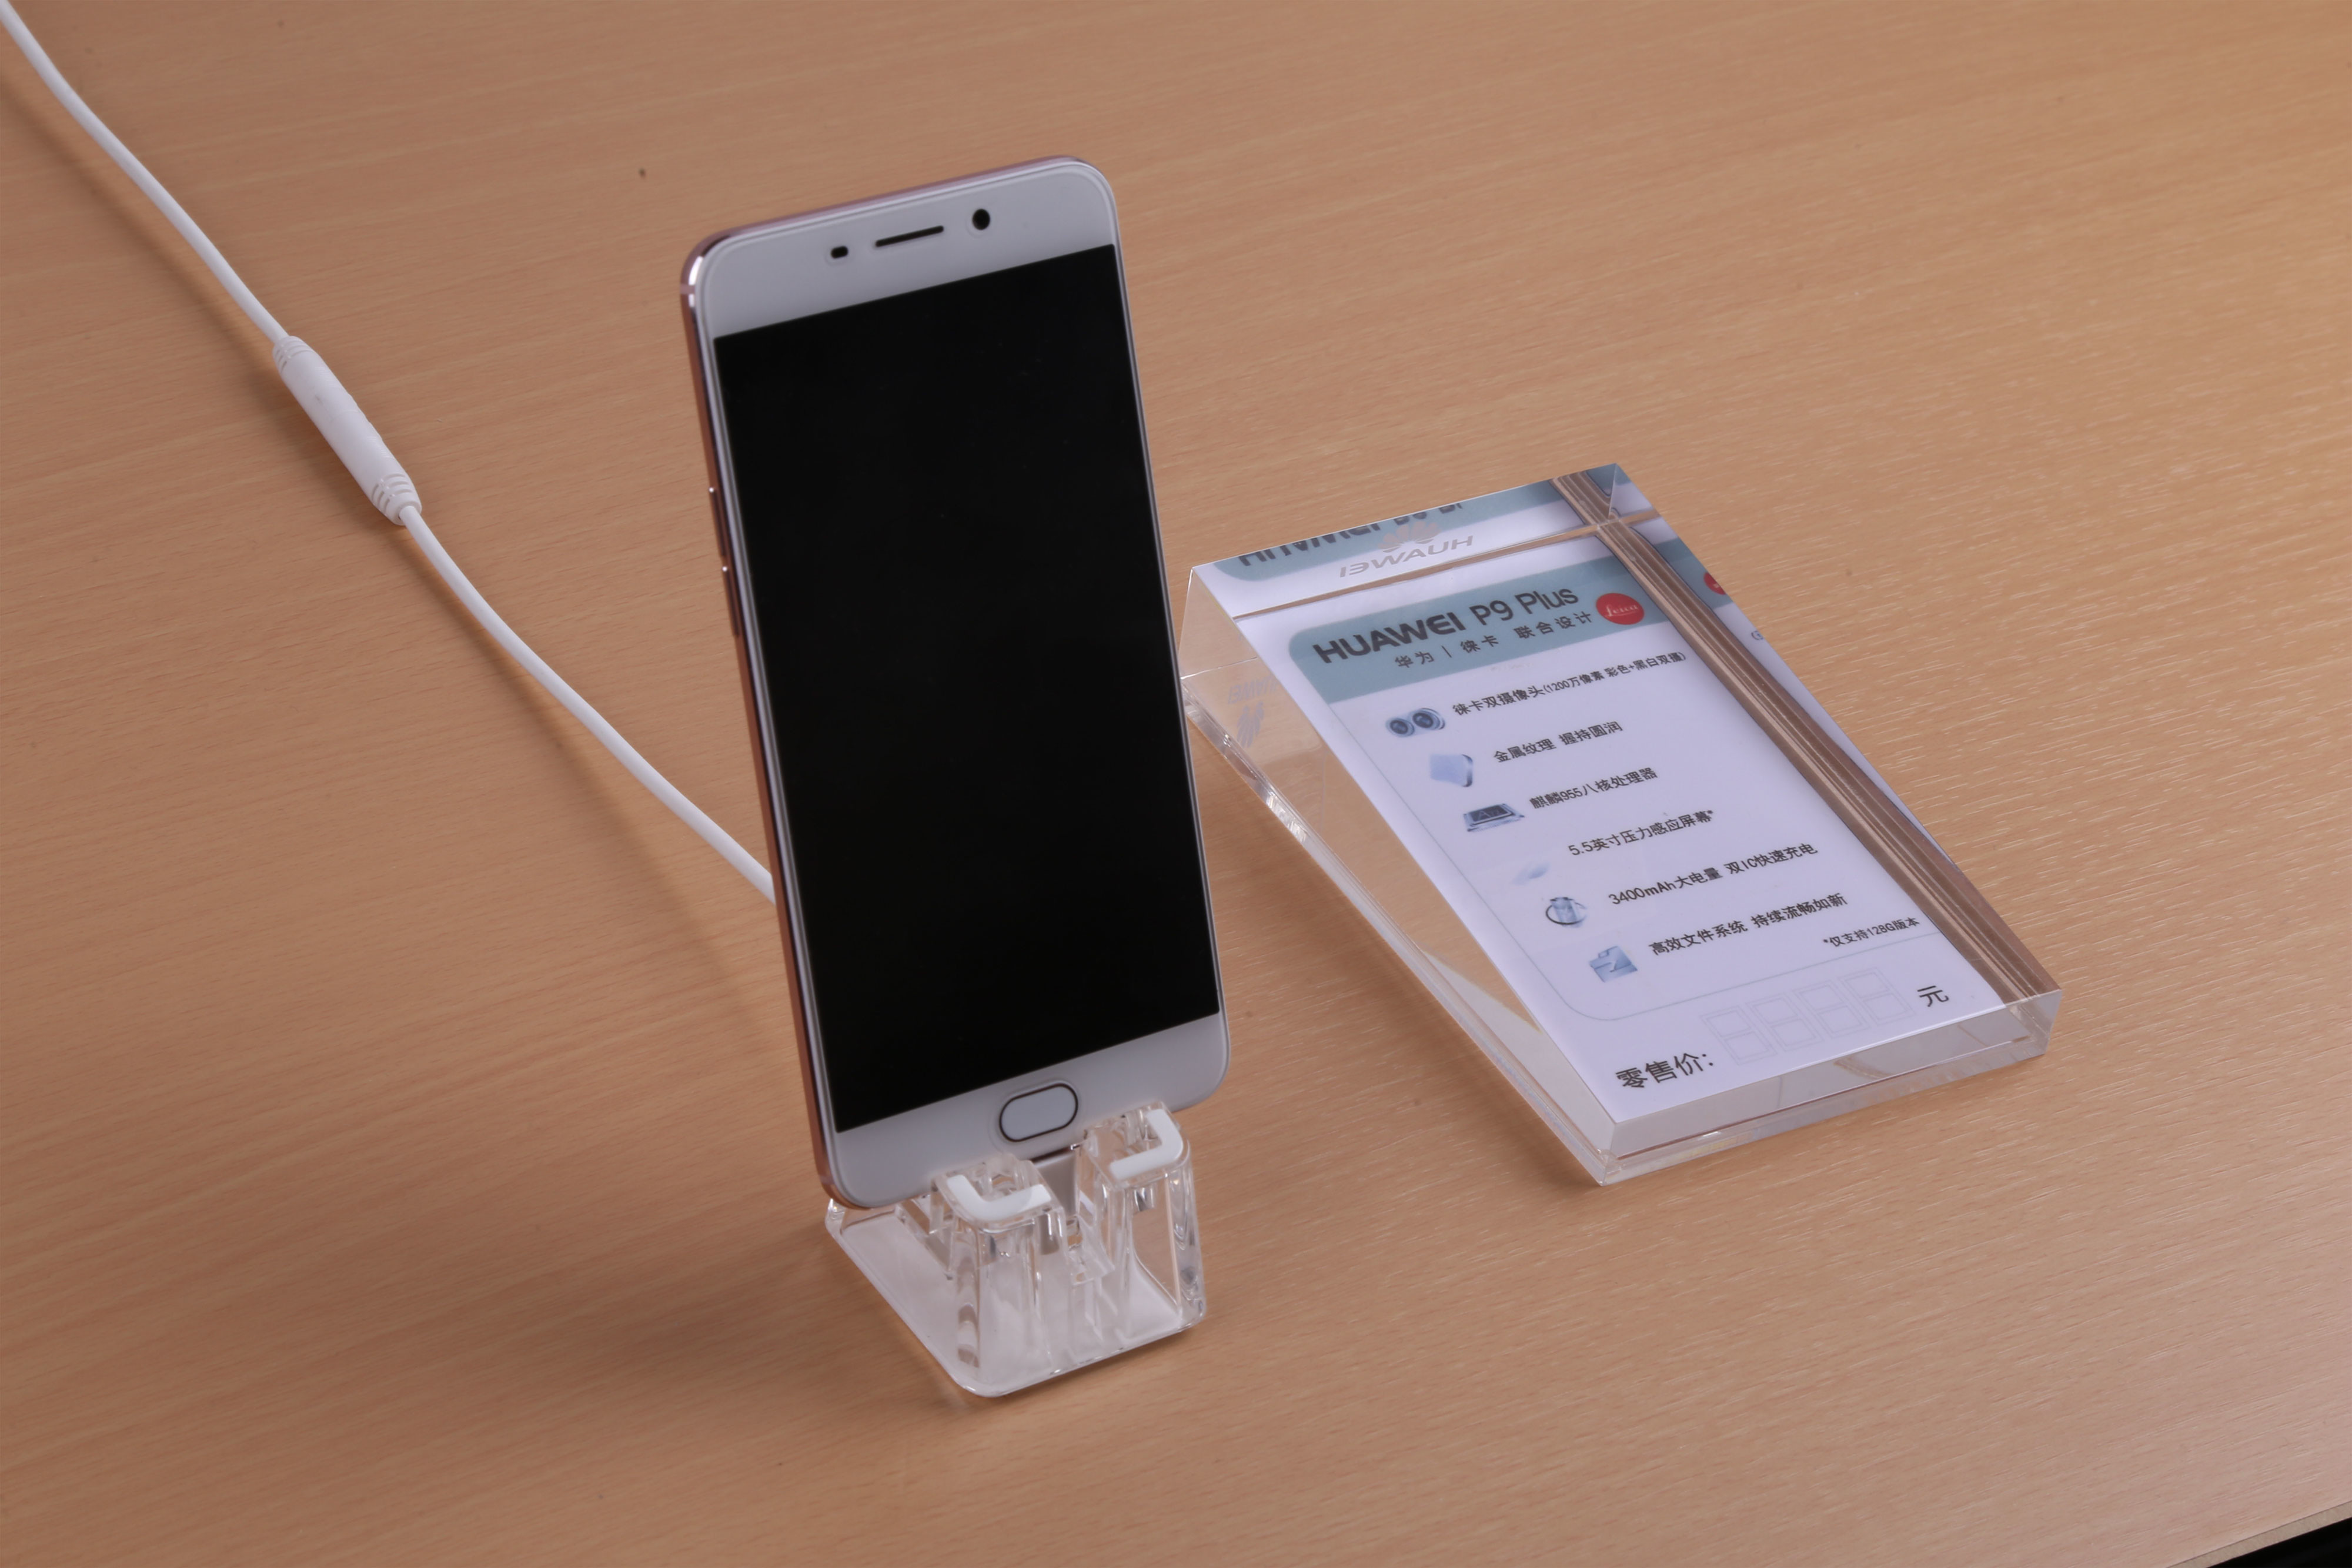 Comer Multi Port Security Alarm Stand For Mobile Phone Display with alarm charging cable acrylic holder